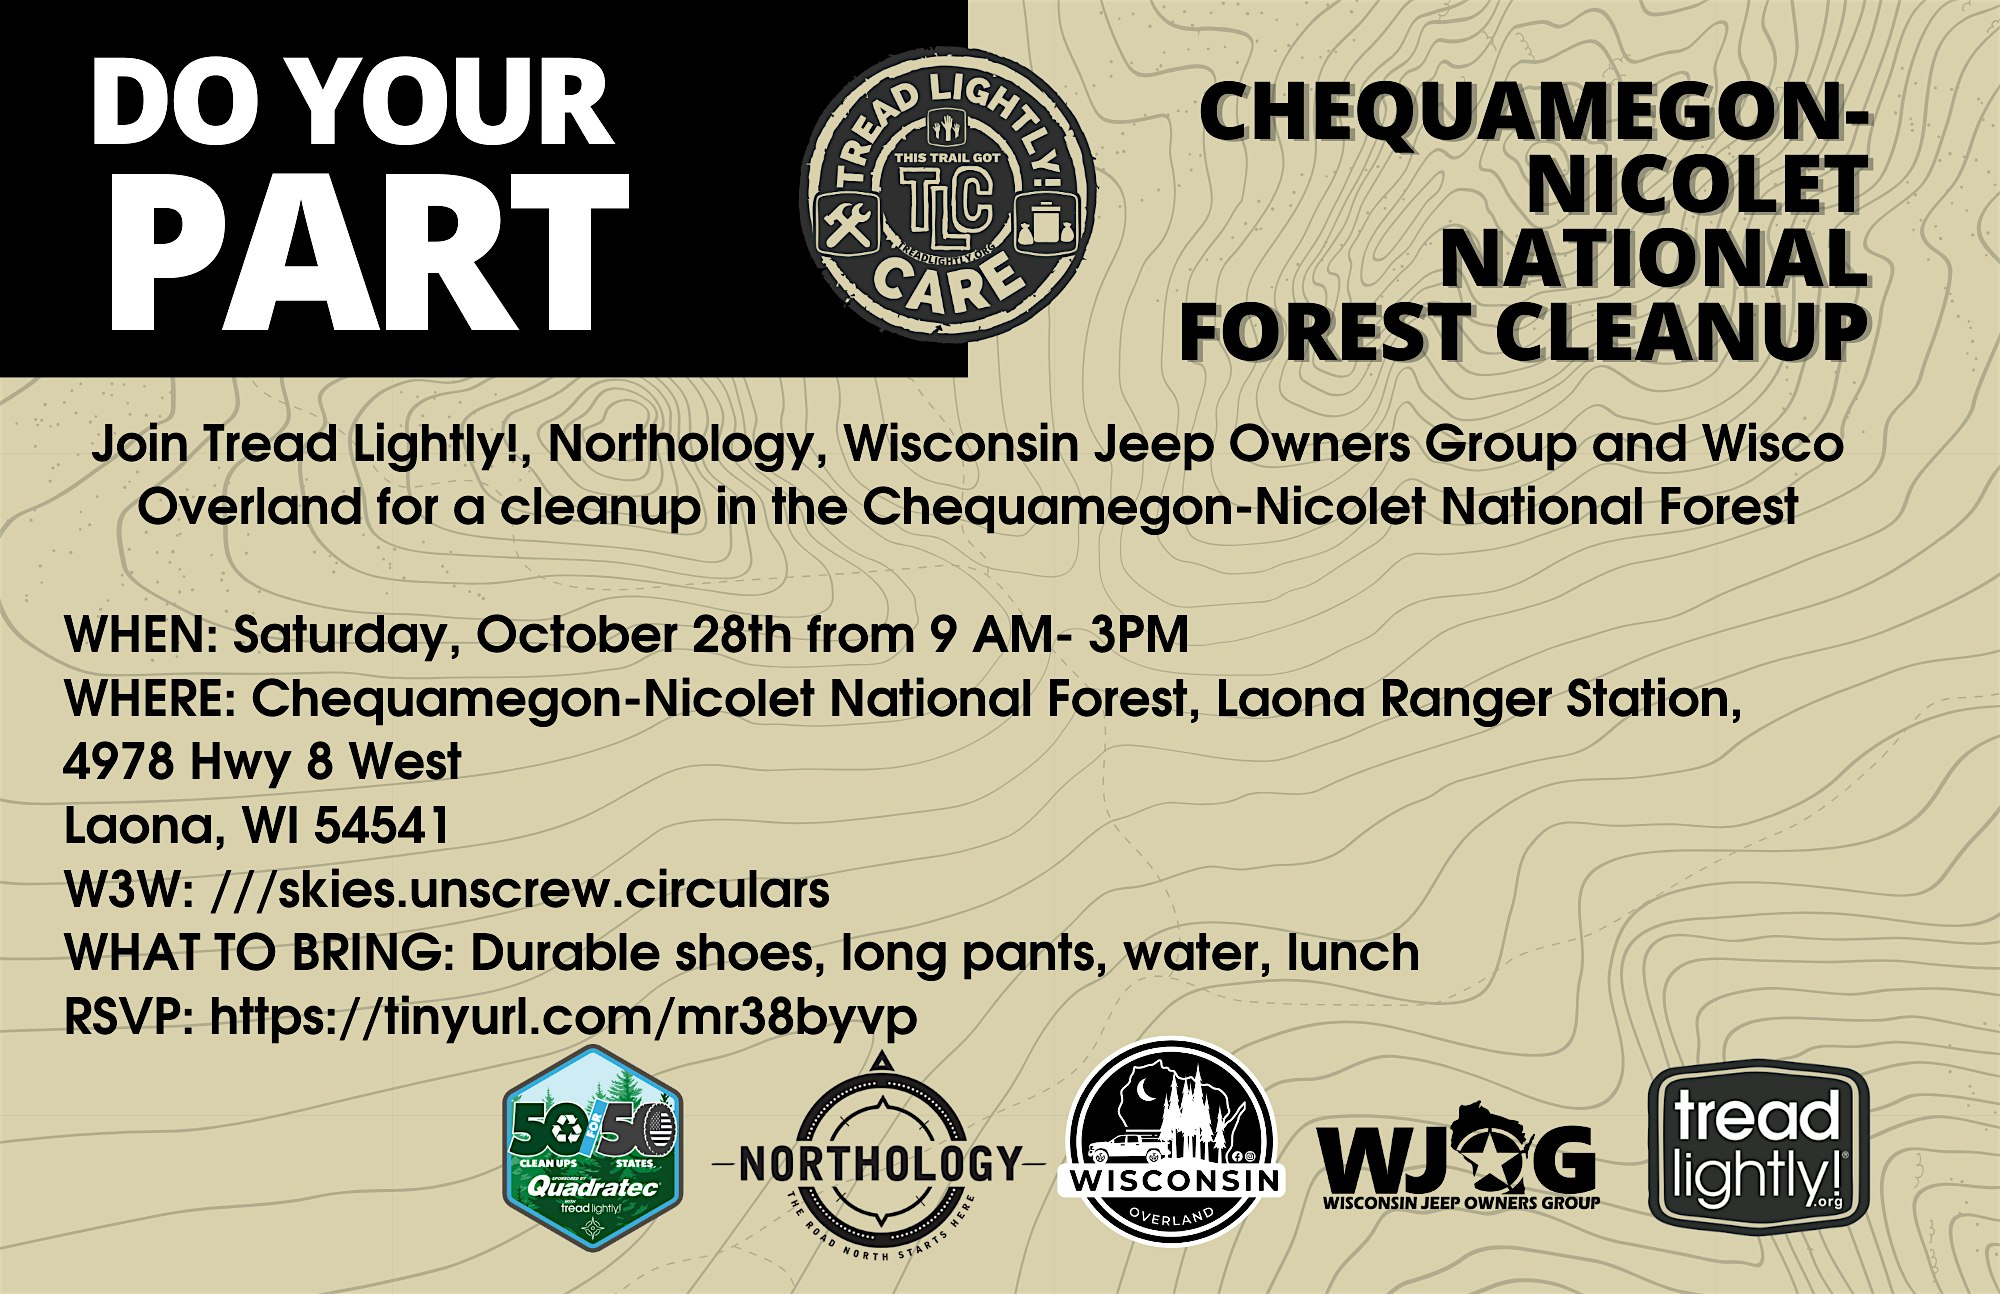 Chequamegon-Nicolet National Forest Cleanup